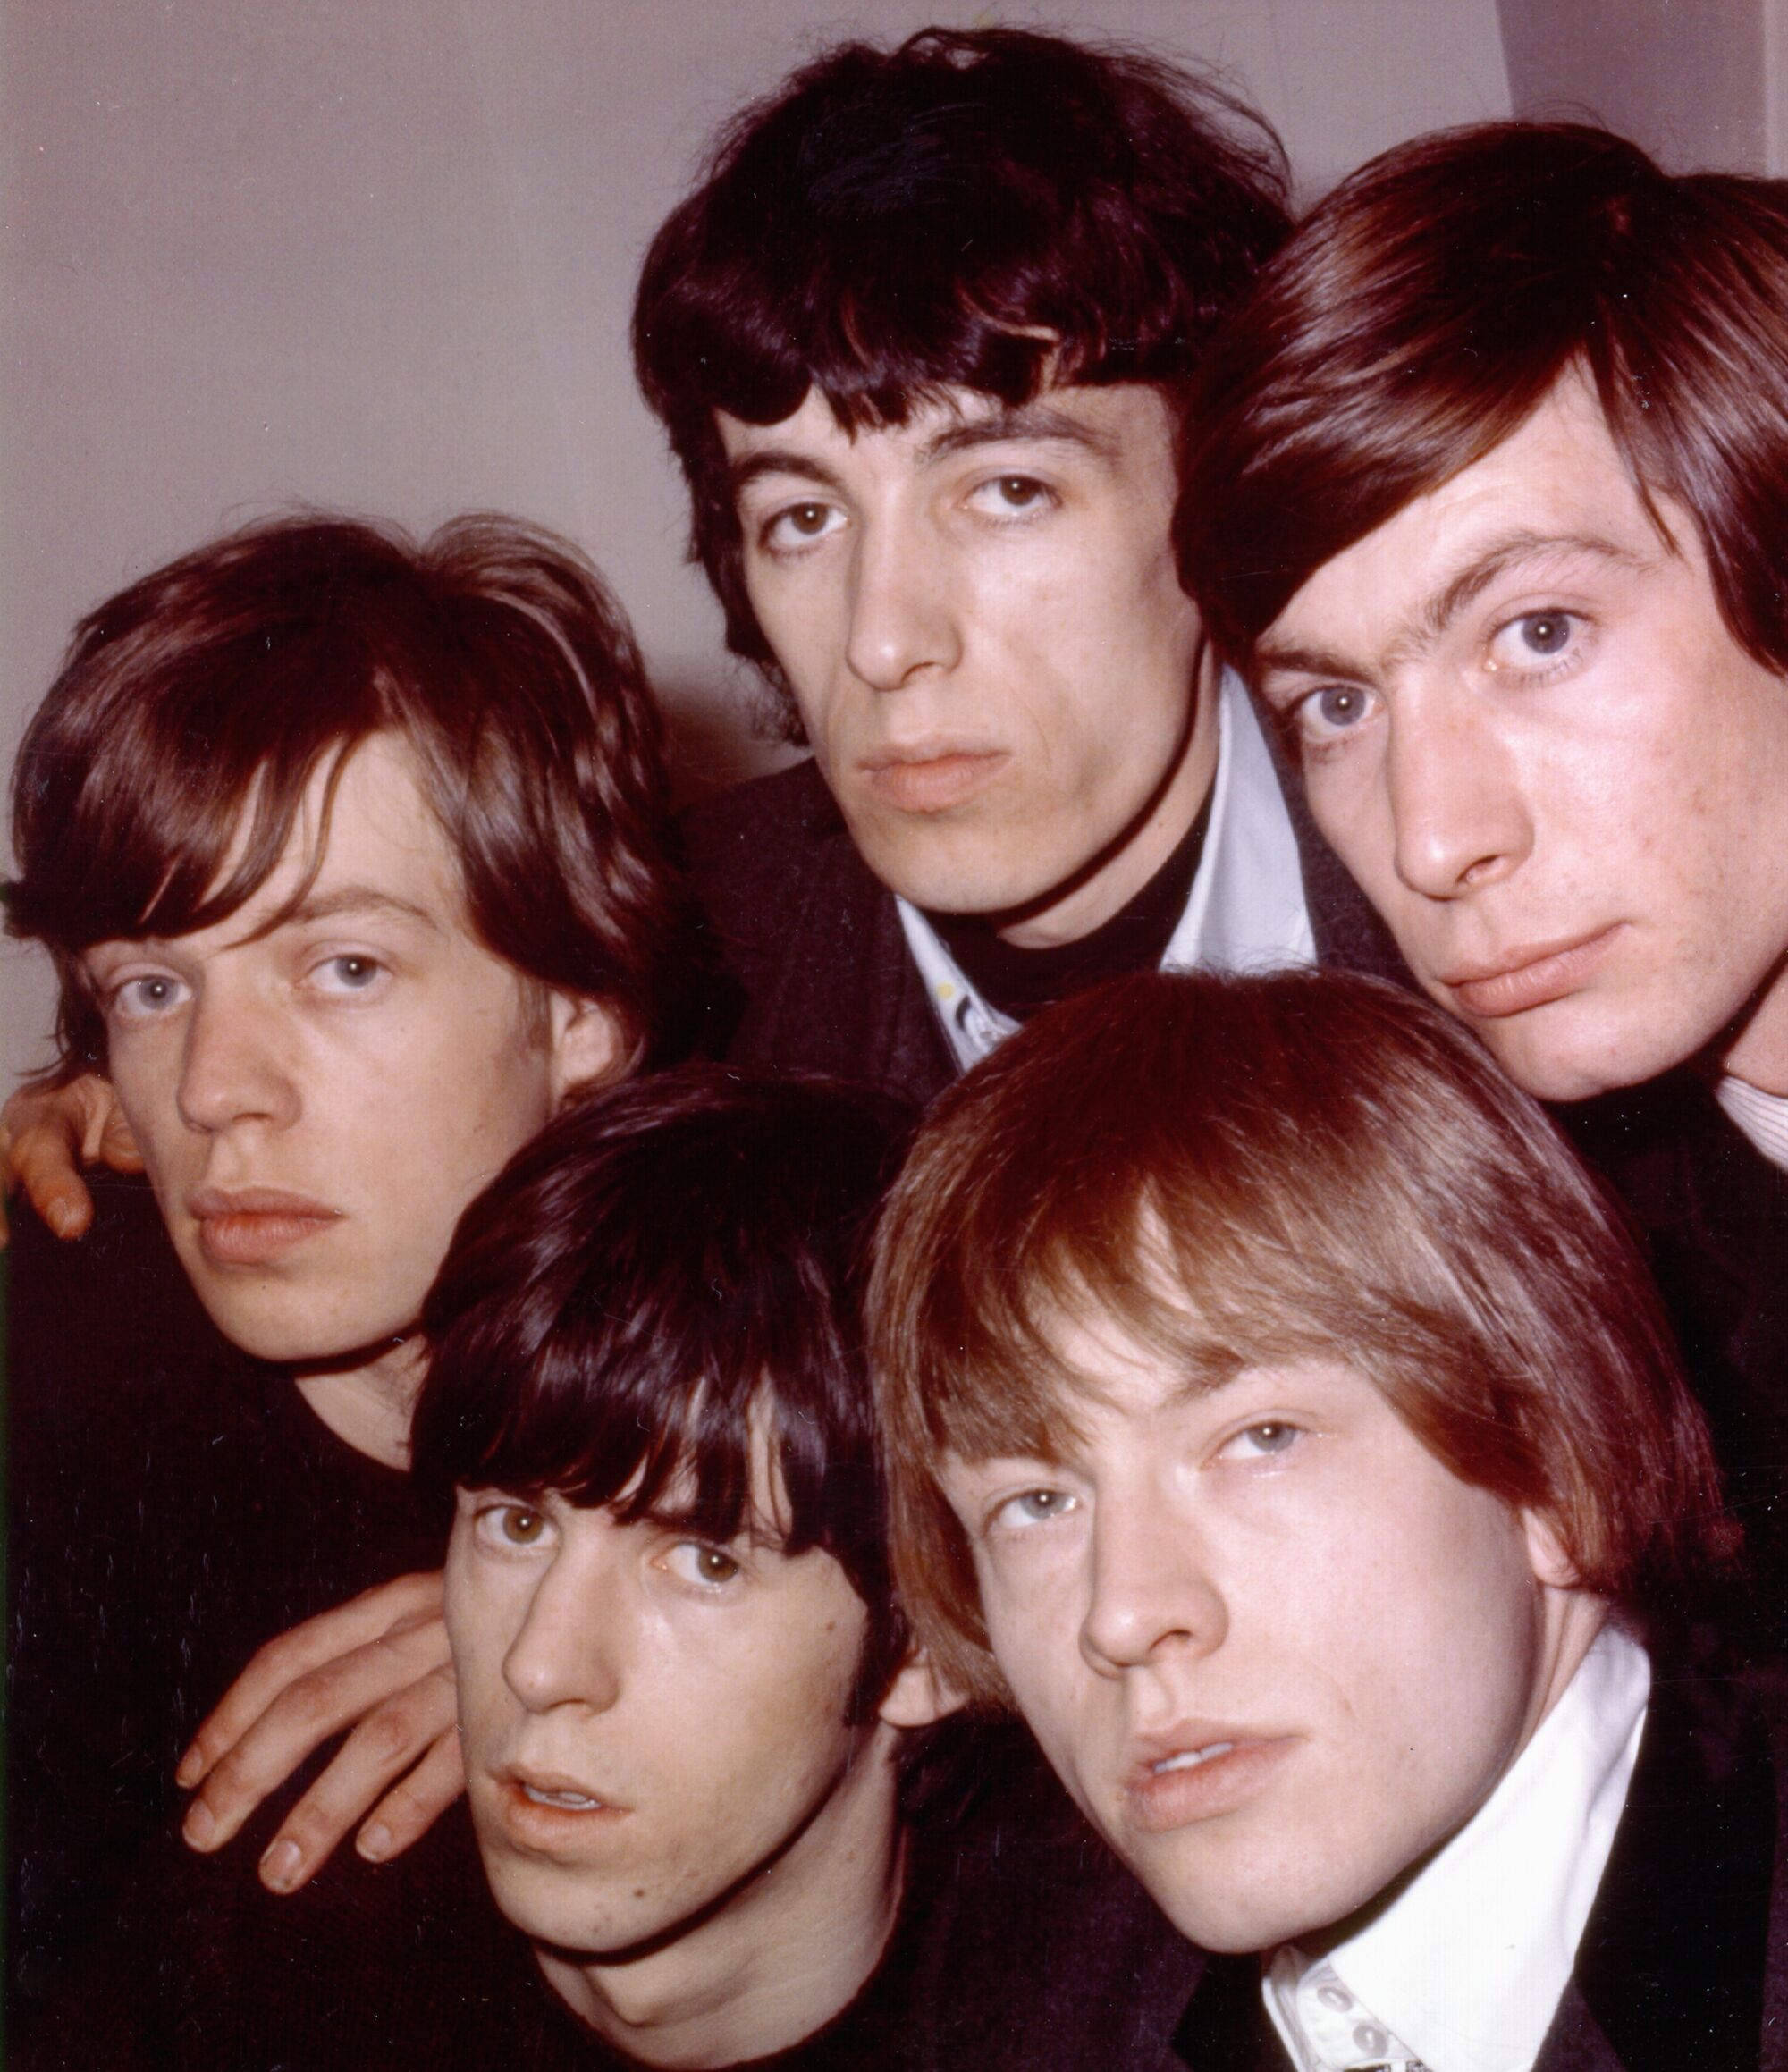 The Rolling Stones pose for a publicity photo in London circa 1965.